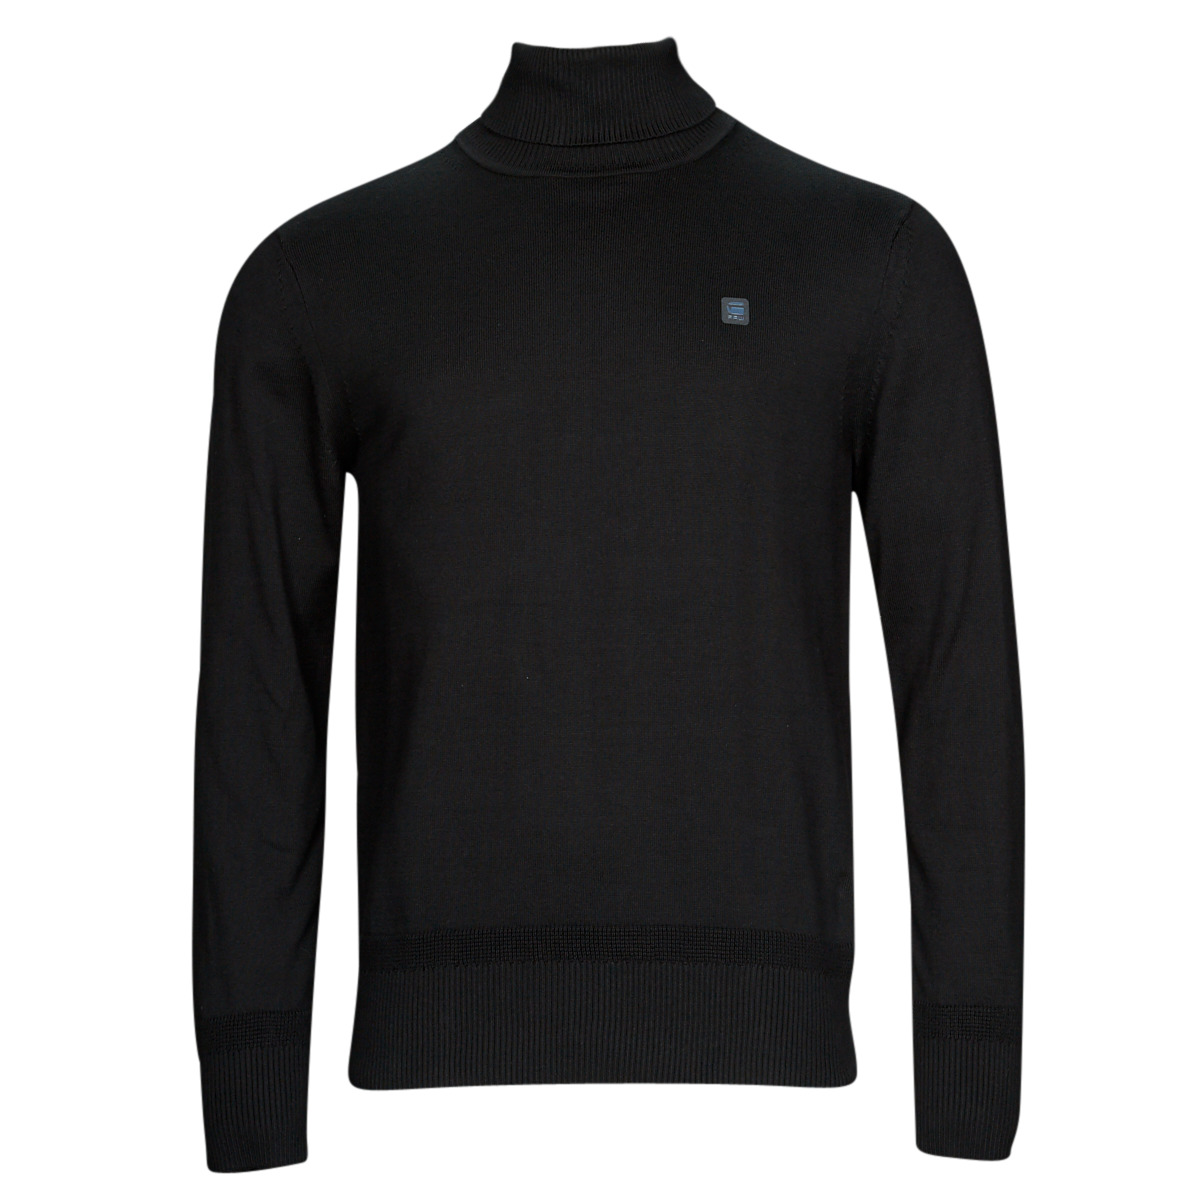 core Clothing NET - Spartoo - Black | Raw Free turtle Premium jumpers ! G-Star delivery Men knit